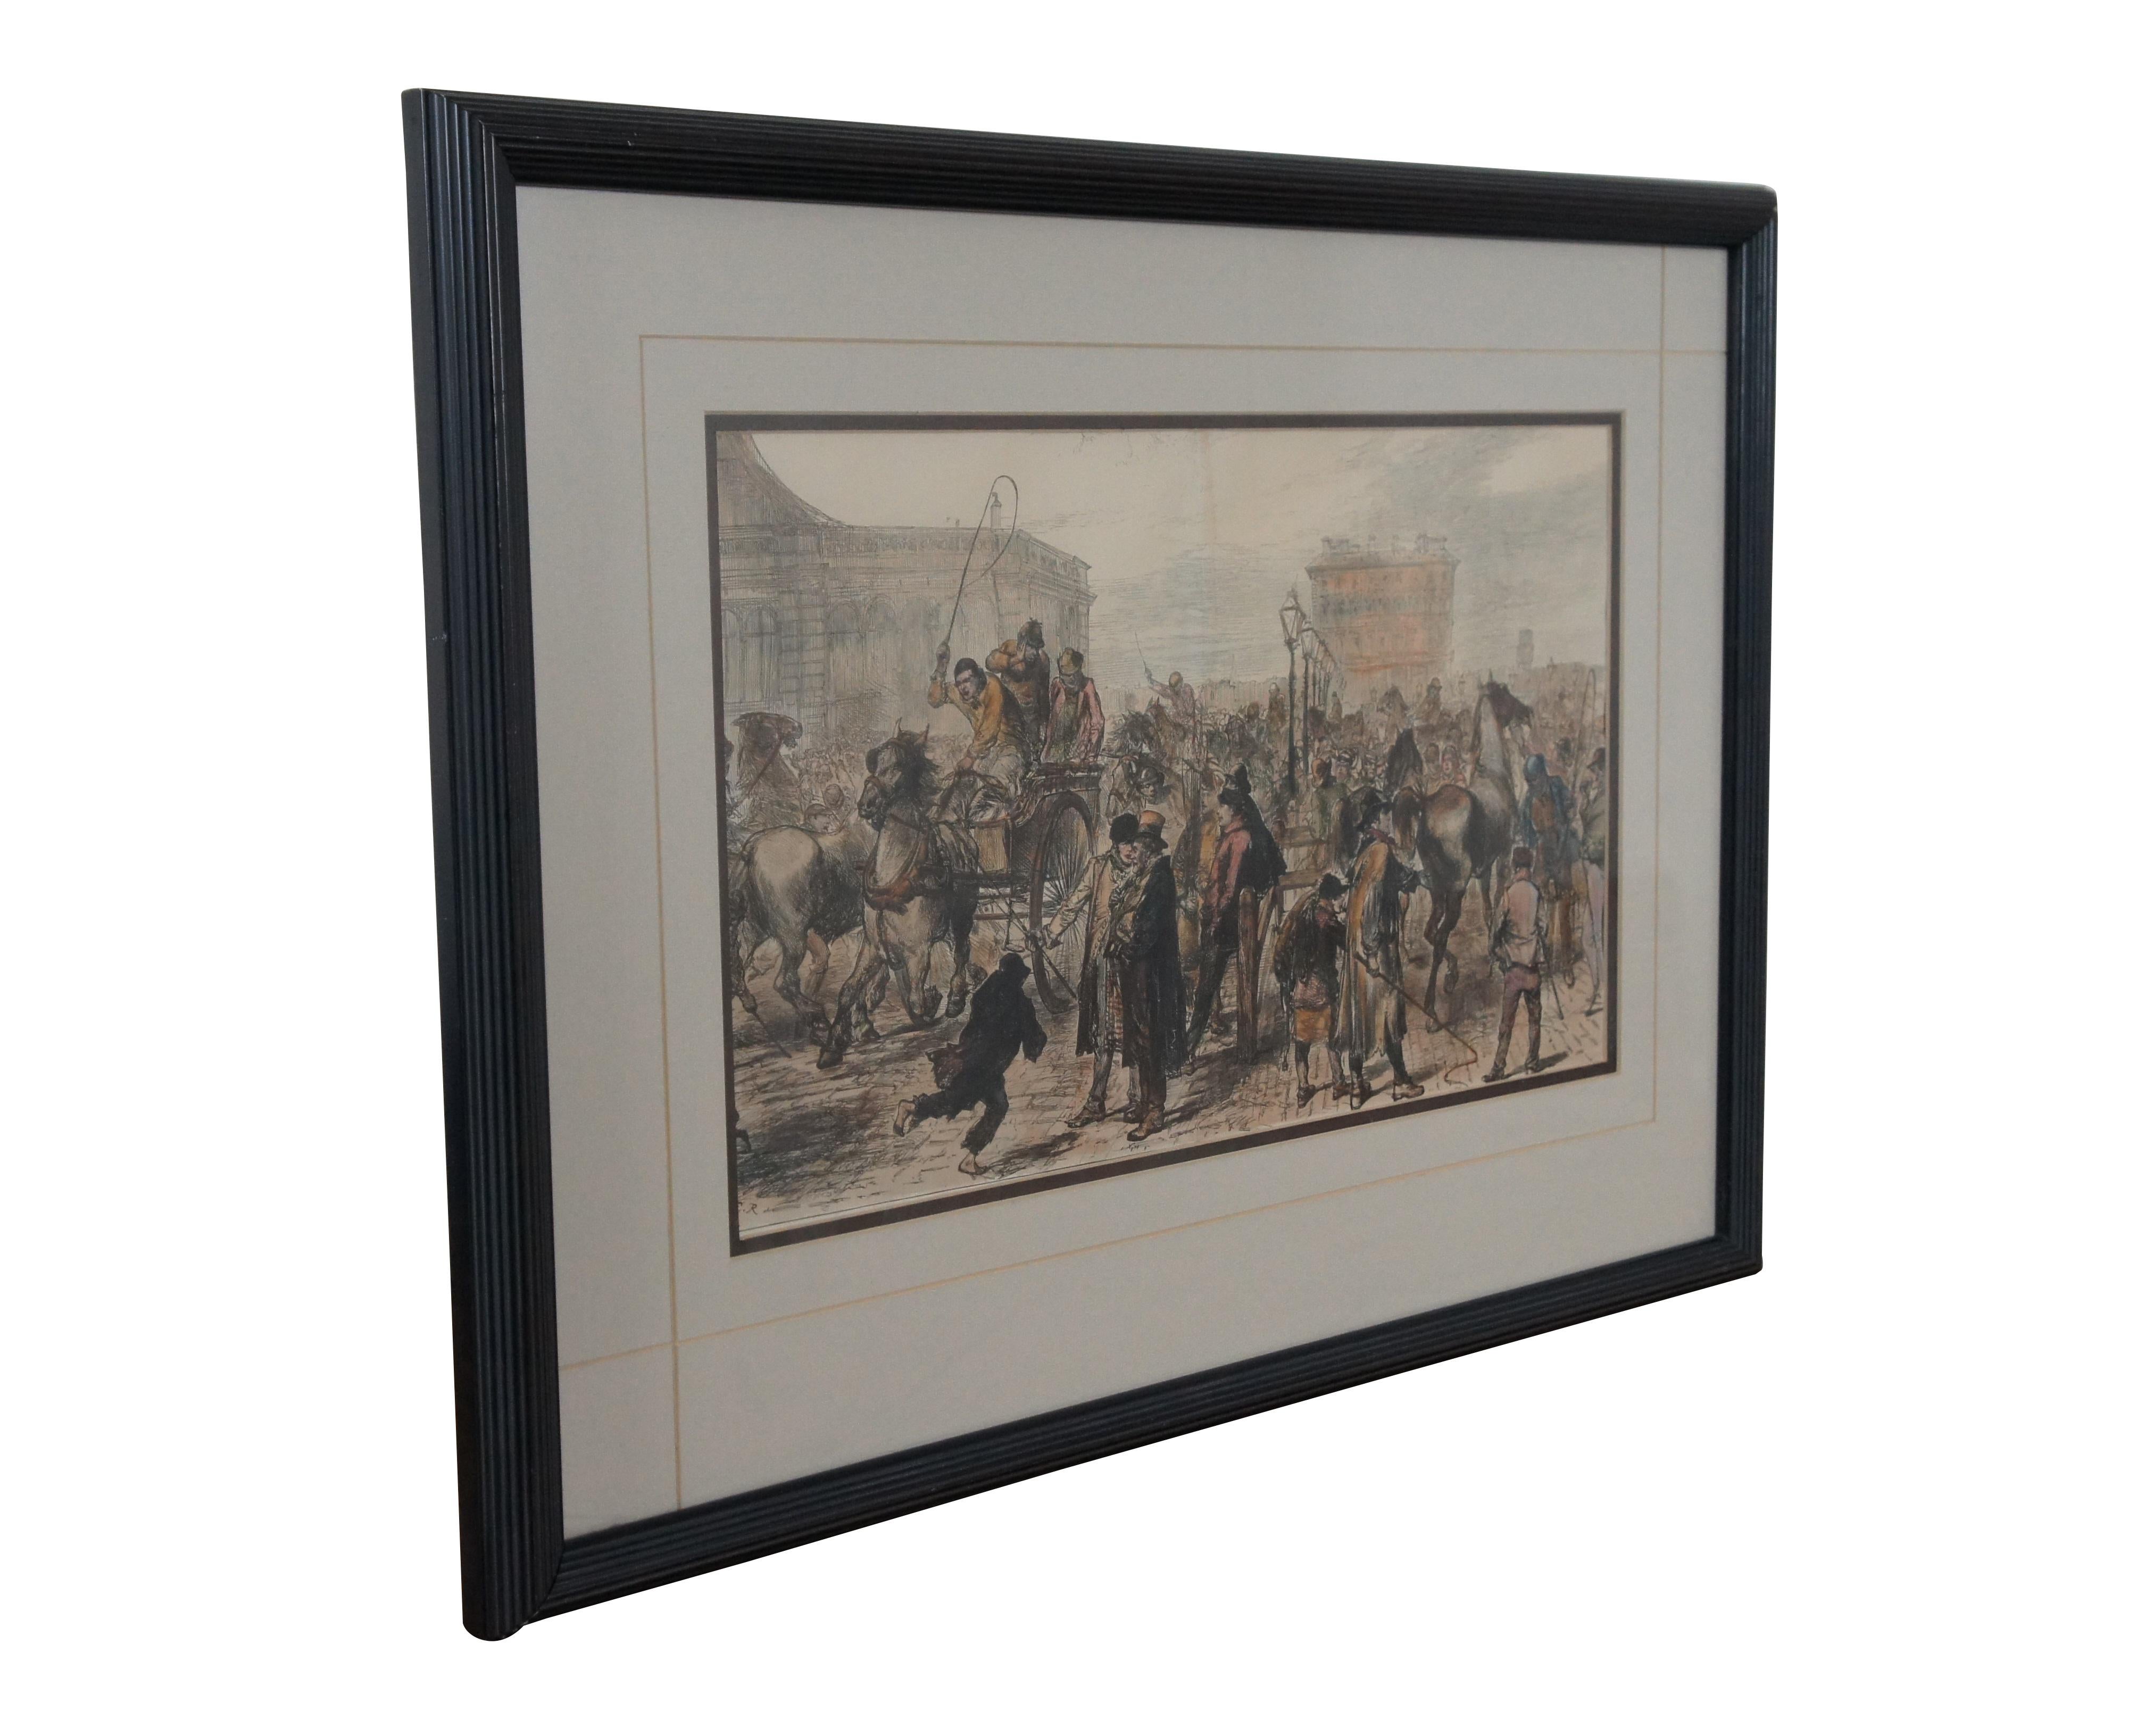 Victorian 1870s Antique Hand Colored Woodcut Engraving Horse Market at Islington Framed For Sale